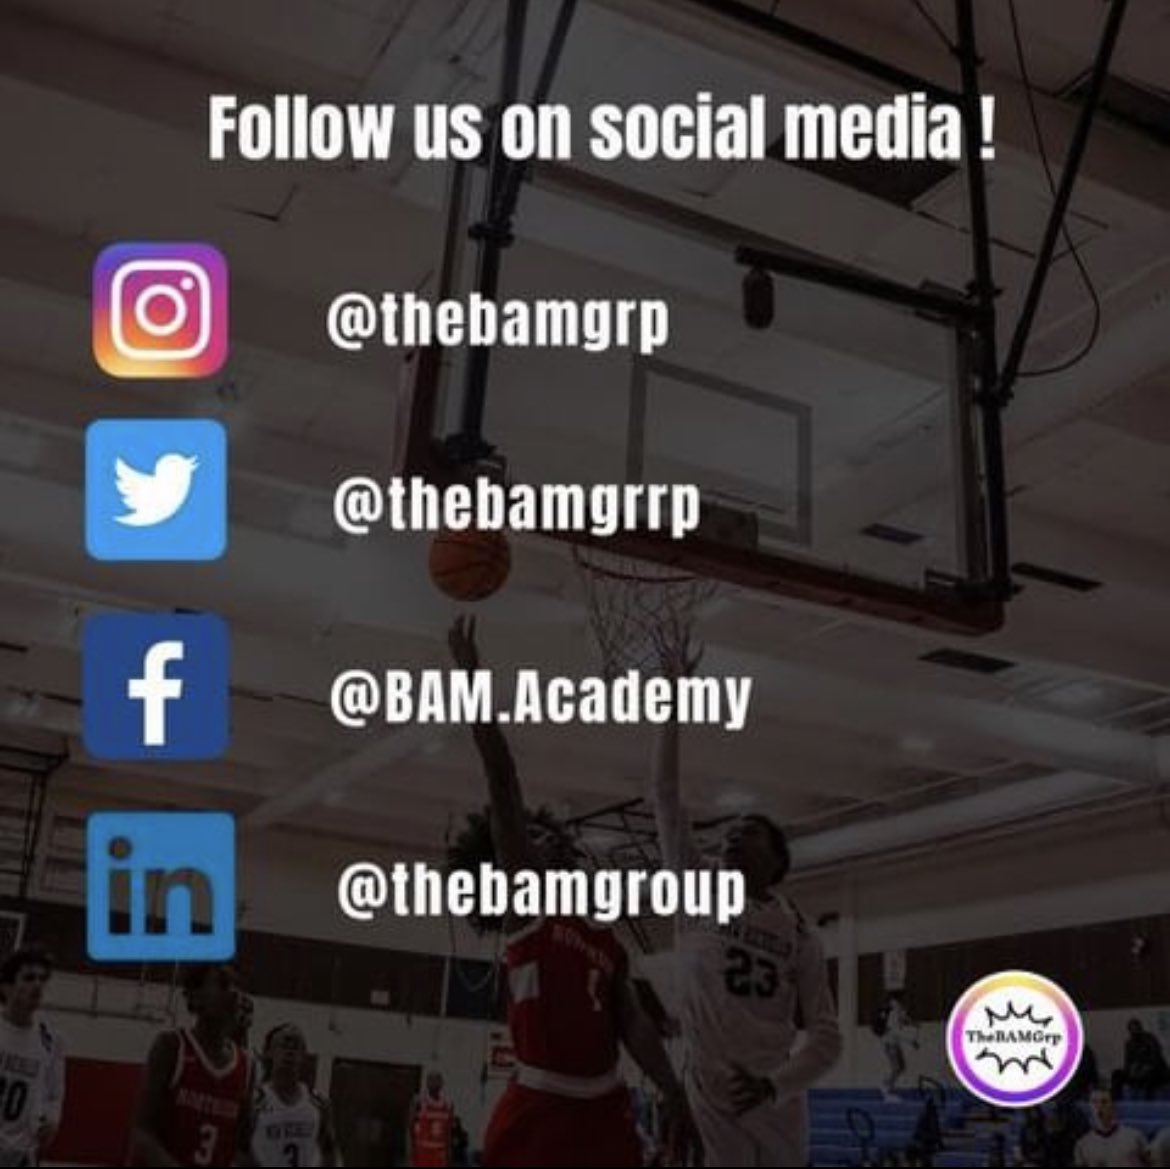 Follow us on all social media platforms to stay updated on new events and more!
#lifethroughbasketball #thebamgrp #basketballtraining #charlottehoops #comingsoon #sportsentertainment